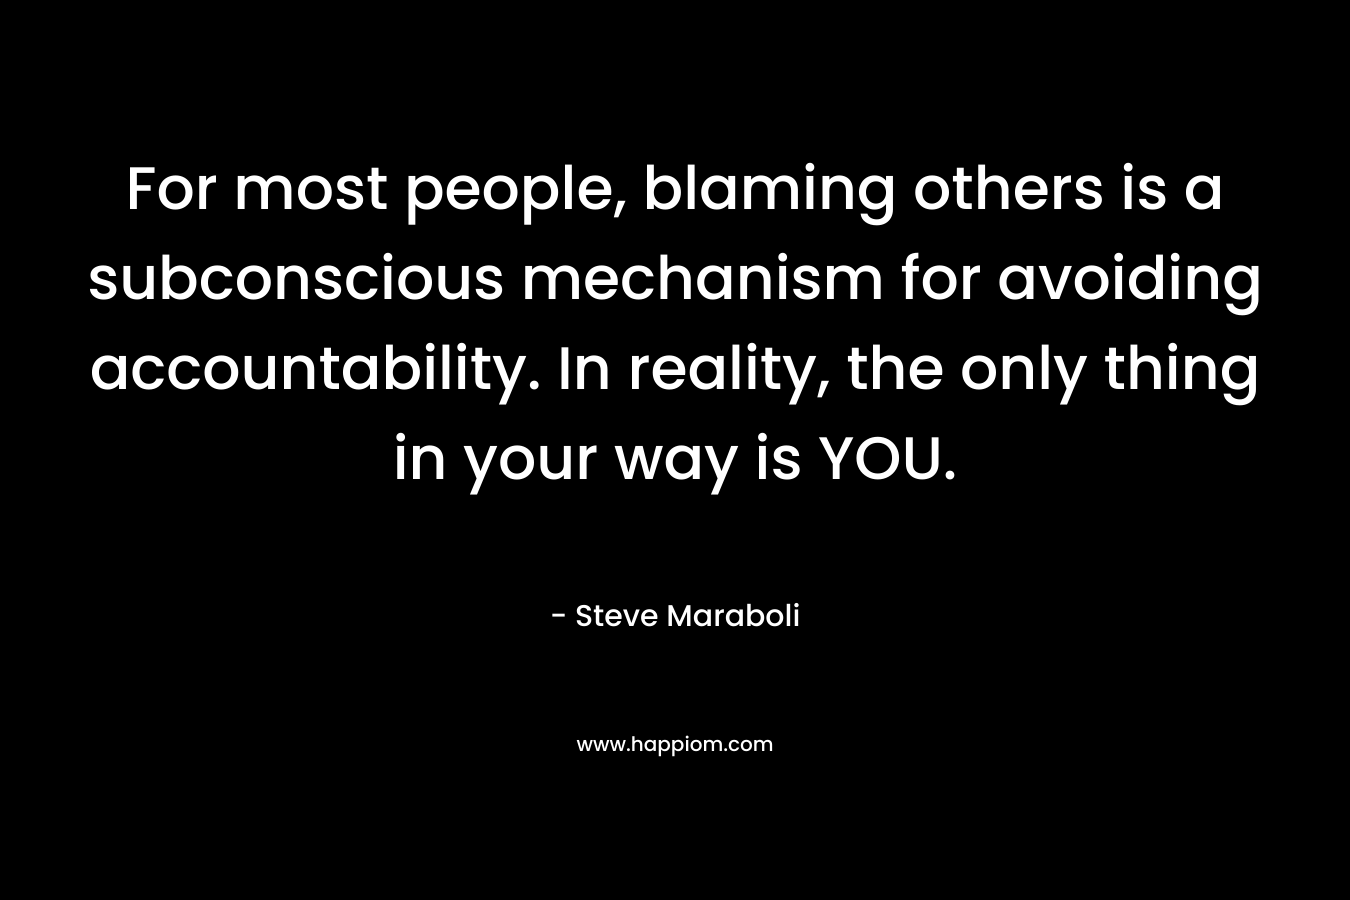 For most people, blaming others is a subconscious mechanism for avoiding accountability. In reality, the only thing in your way is YOU.